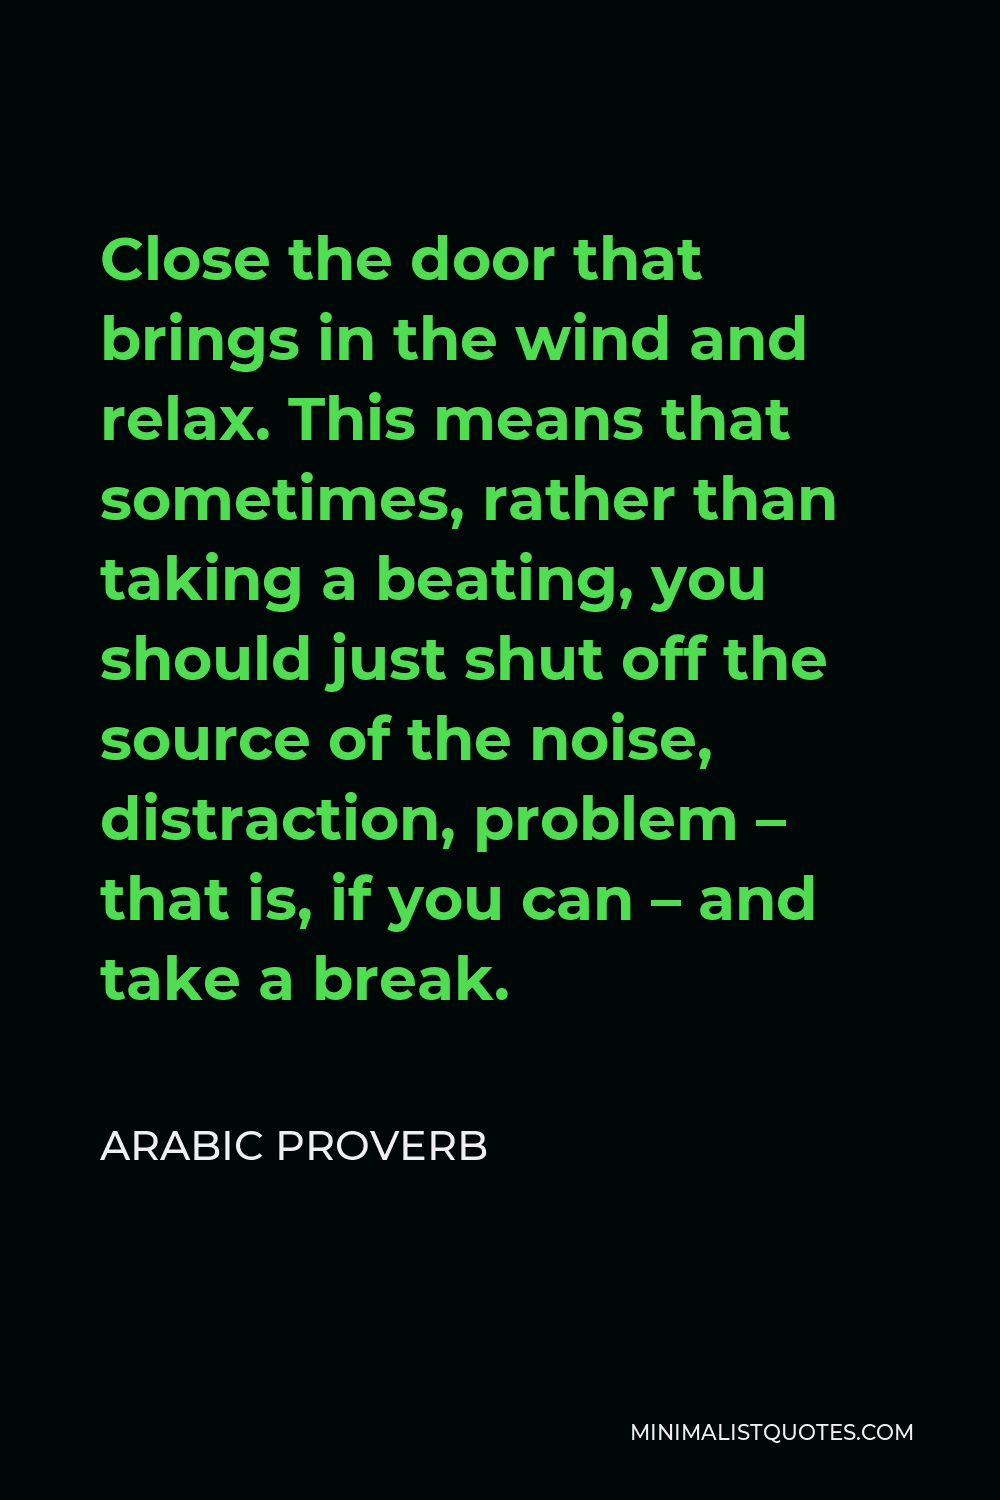 Arabic Proverb Quote - Close the door that brings in the wind and relax. This means that sometimes, rather than taking a beating, you should just shut off the source of the noise, distraction, problem – that is, if you can – and take a break.